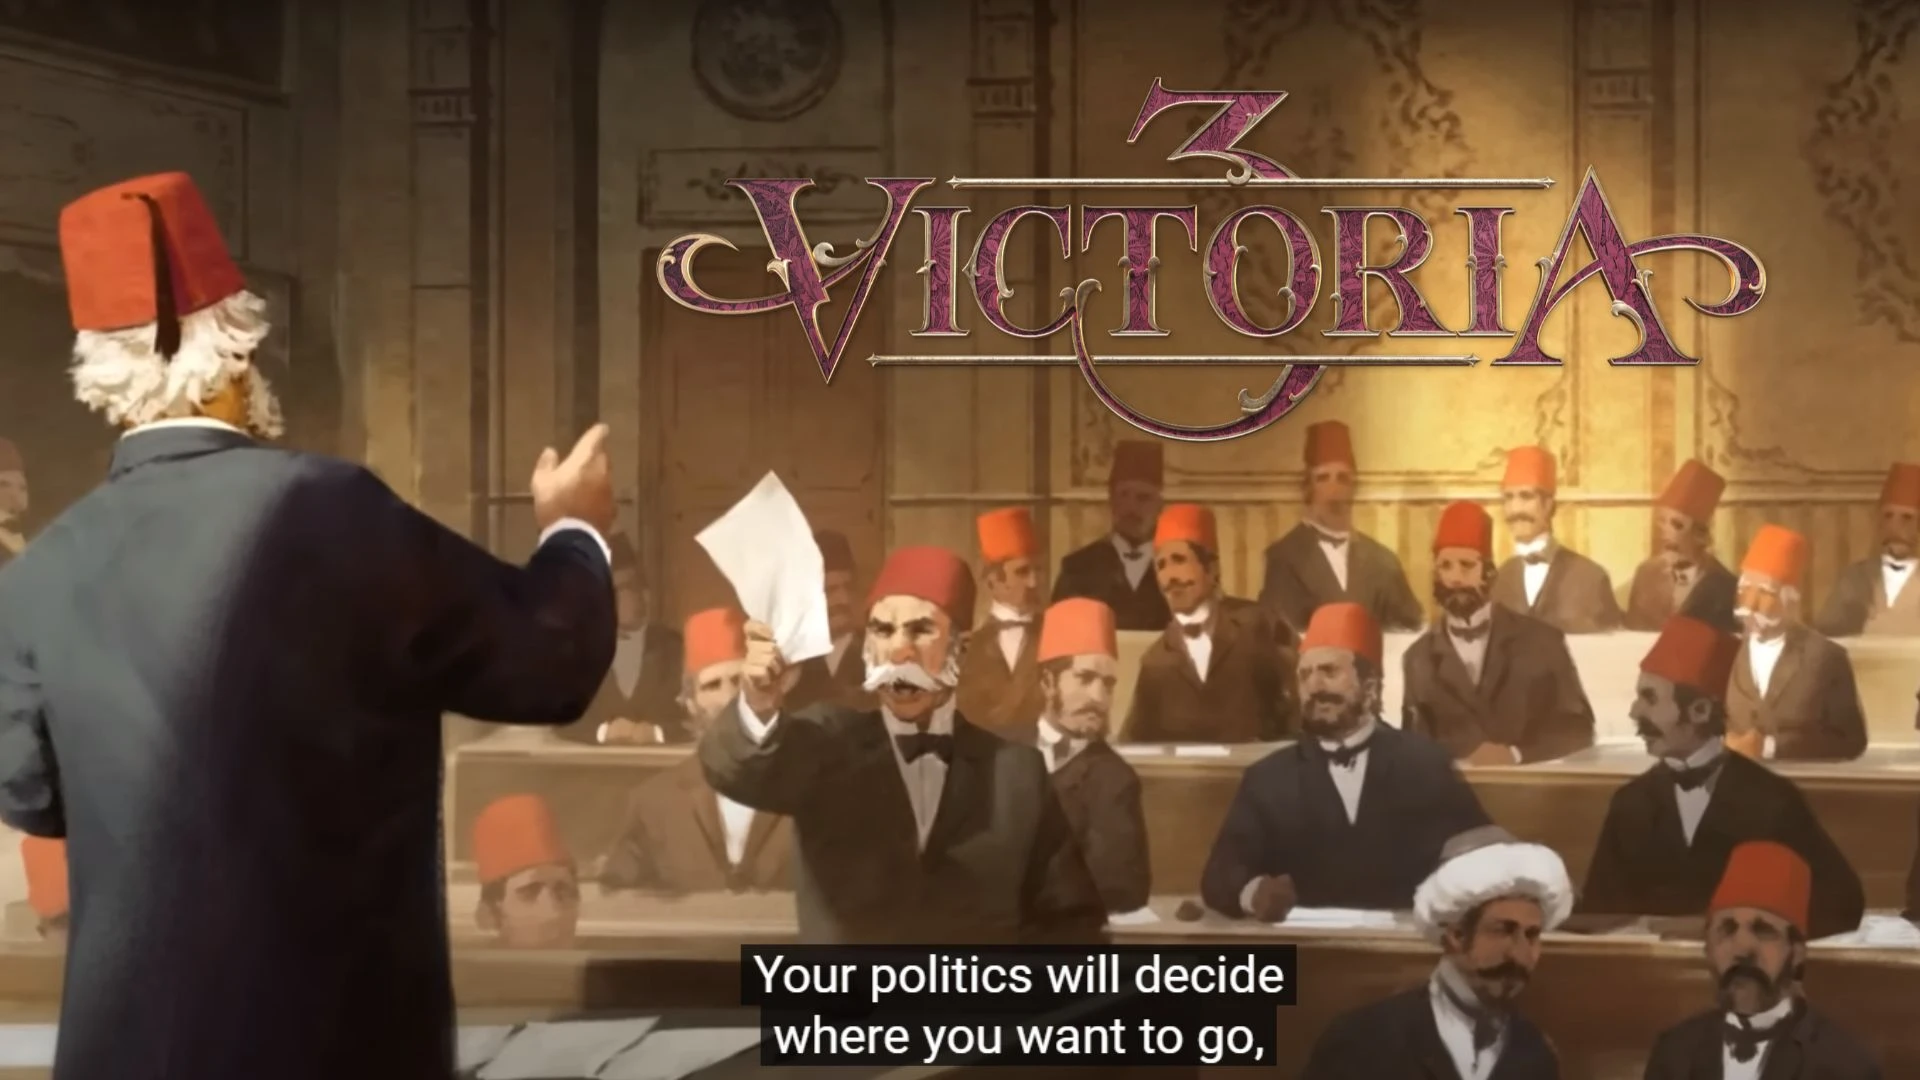 Victoria 3 Parents Guide and Age Rating (2022)